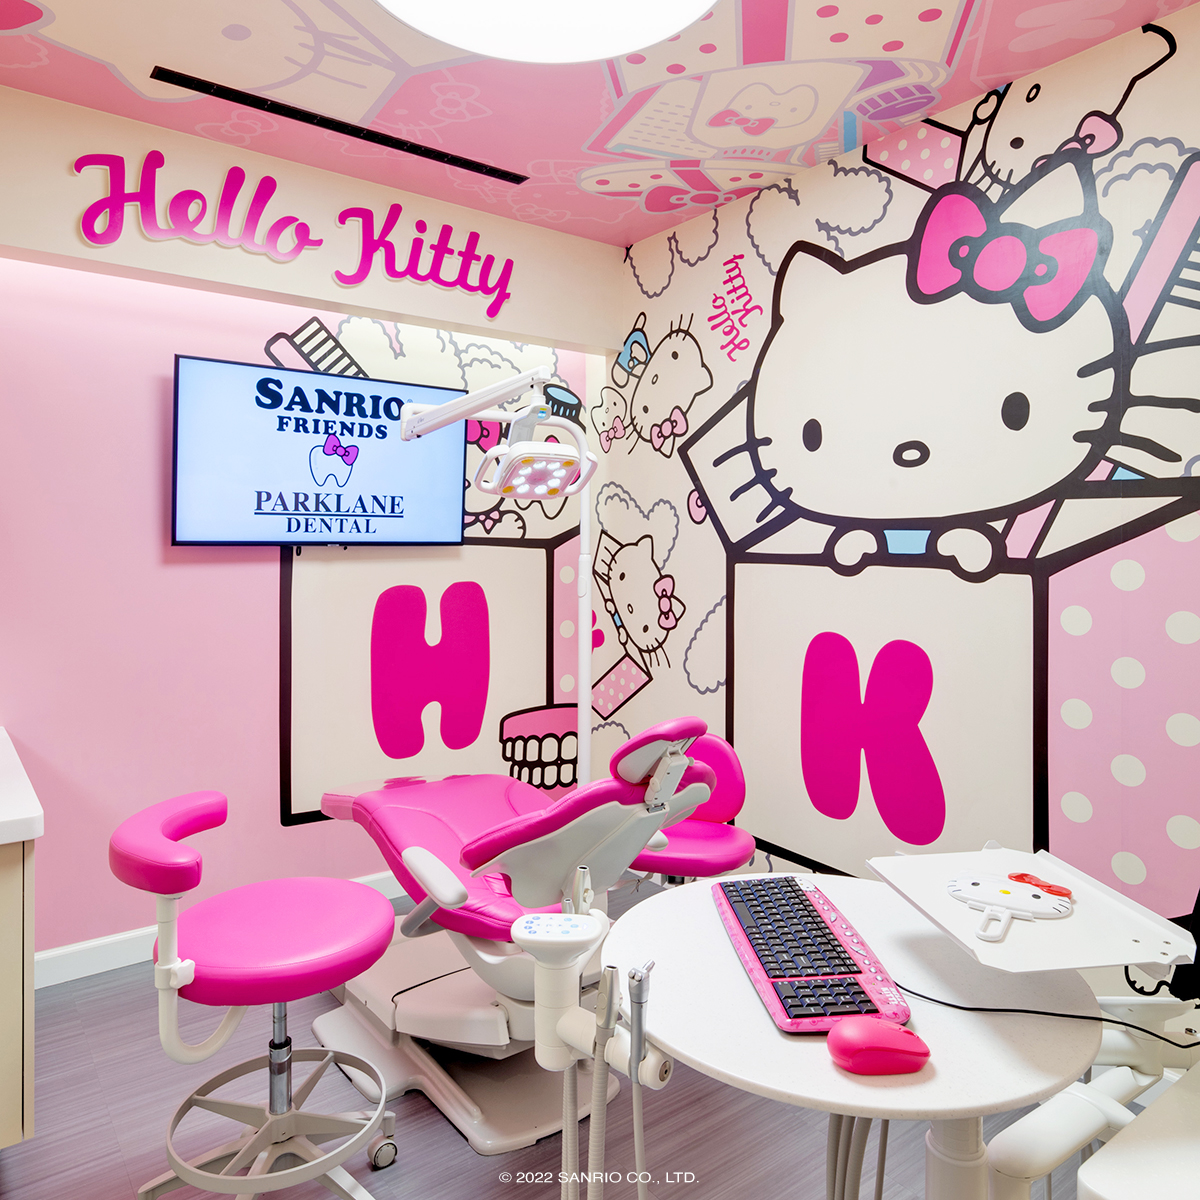 Happy smiles for #NationalDentistDay! 🦷 🎀  Experience the supercute Hello Kitty themed room only at Parklane Dental in Los Angeles. Adults and children welcome! 

Book your first visit here: bit.ly/34iM8fB